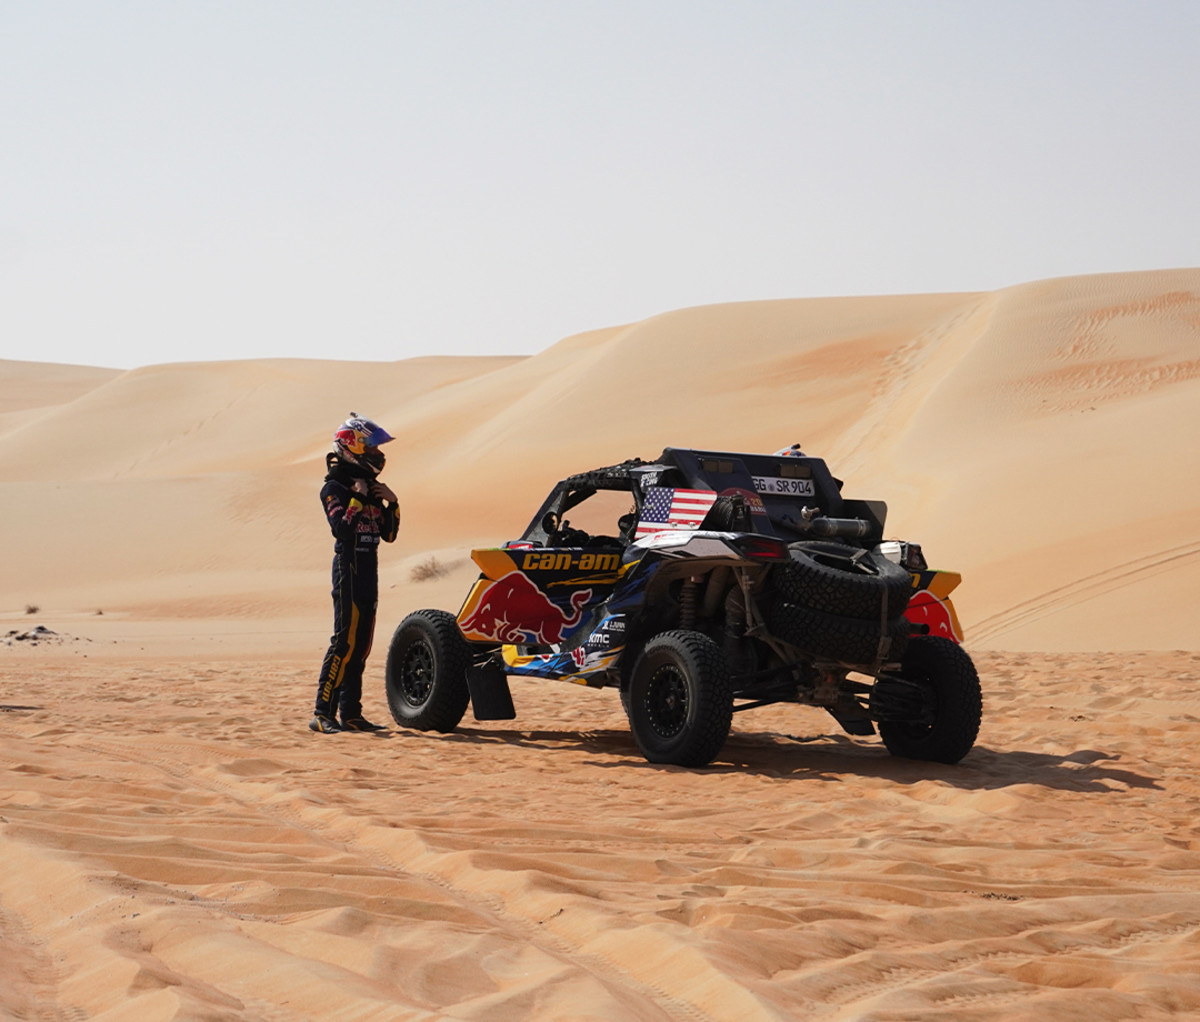 Dakar off-road racer standing next to his side by side with desert dunes in the background.